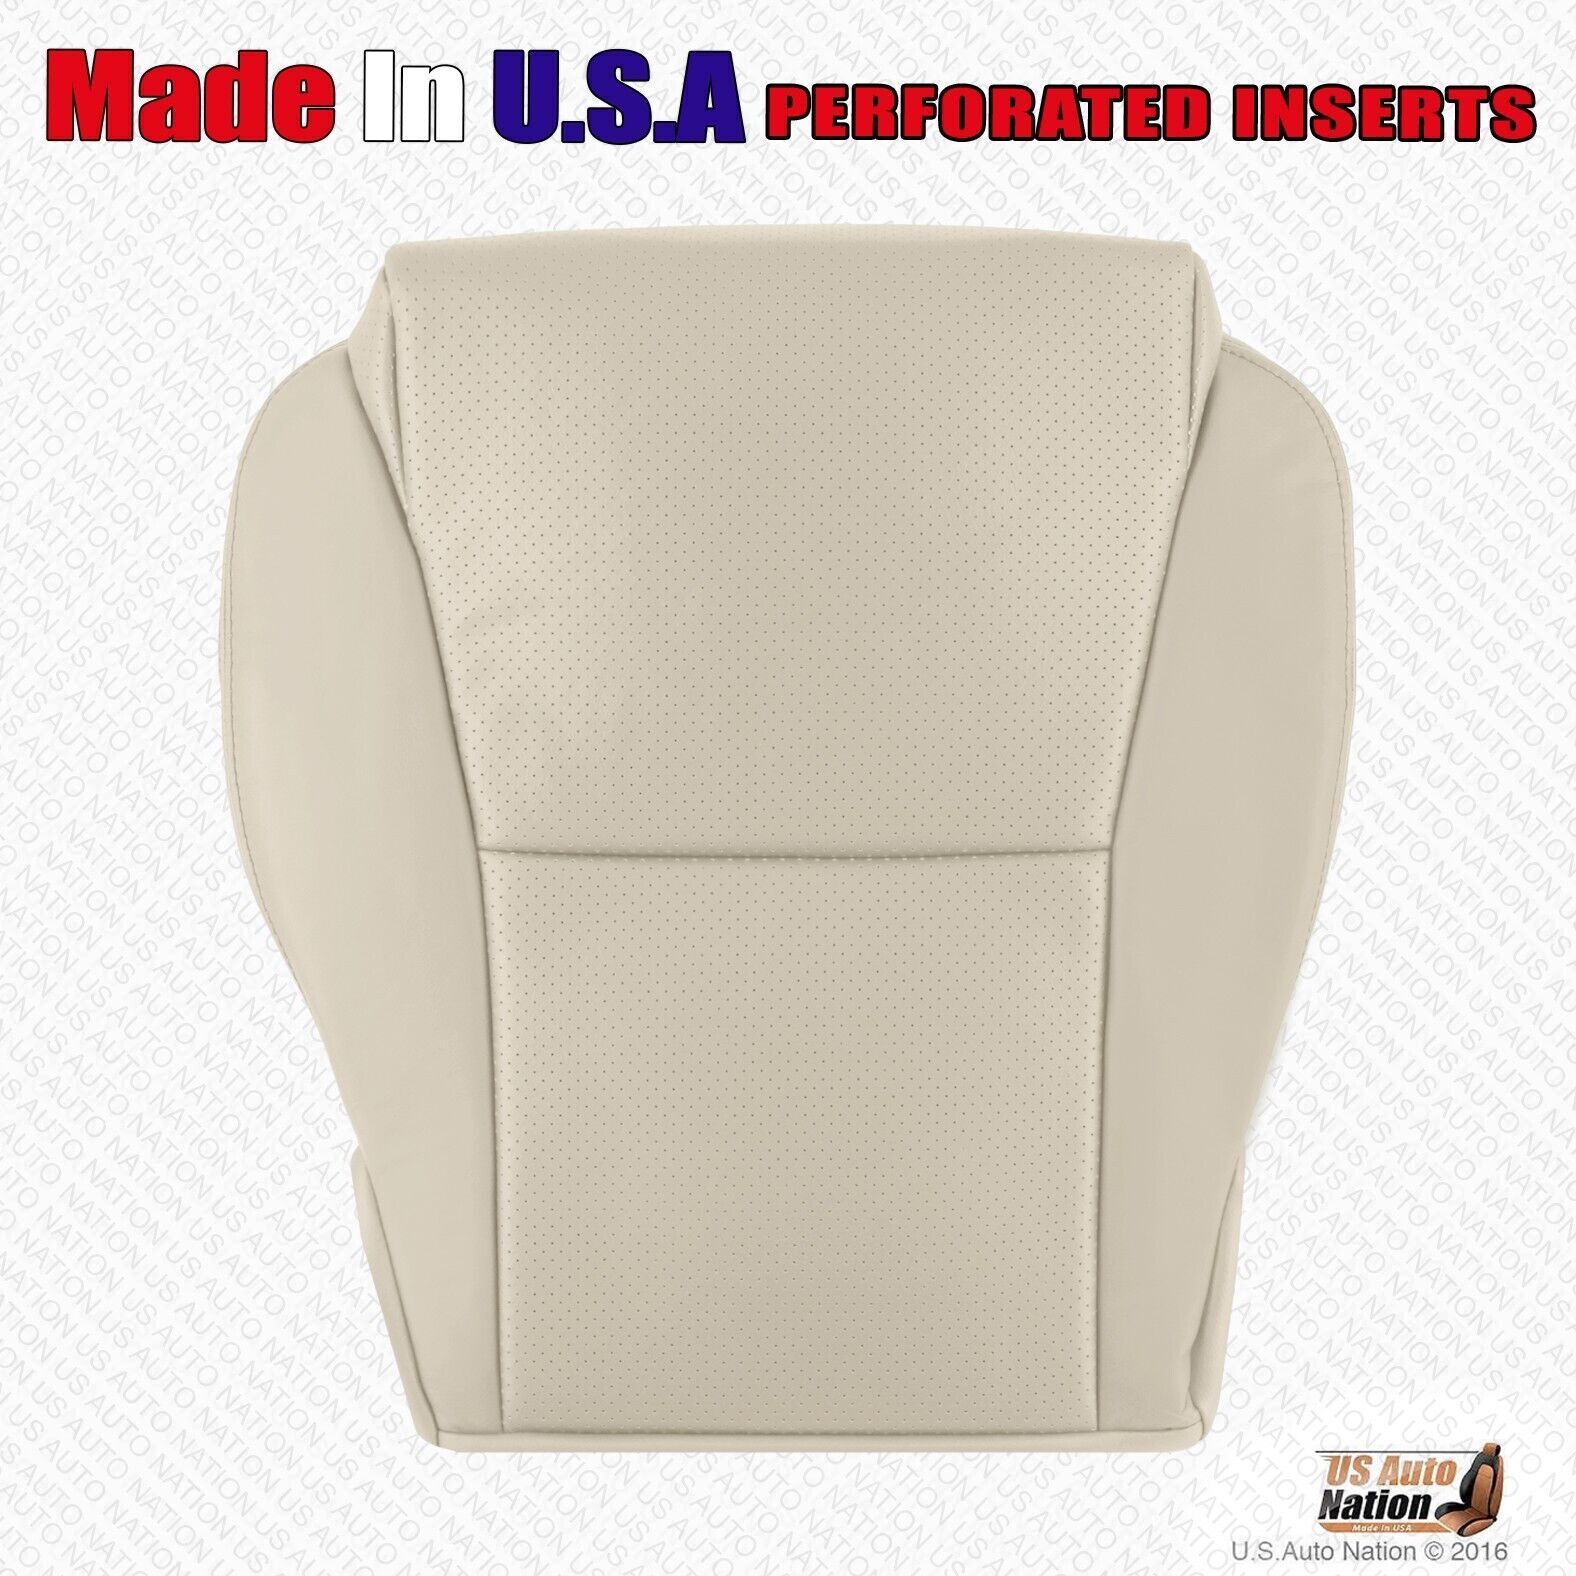 2004 2005 2006 2007 2008 For Toyota Solara Driver Passenger Leather Cover Tan